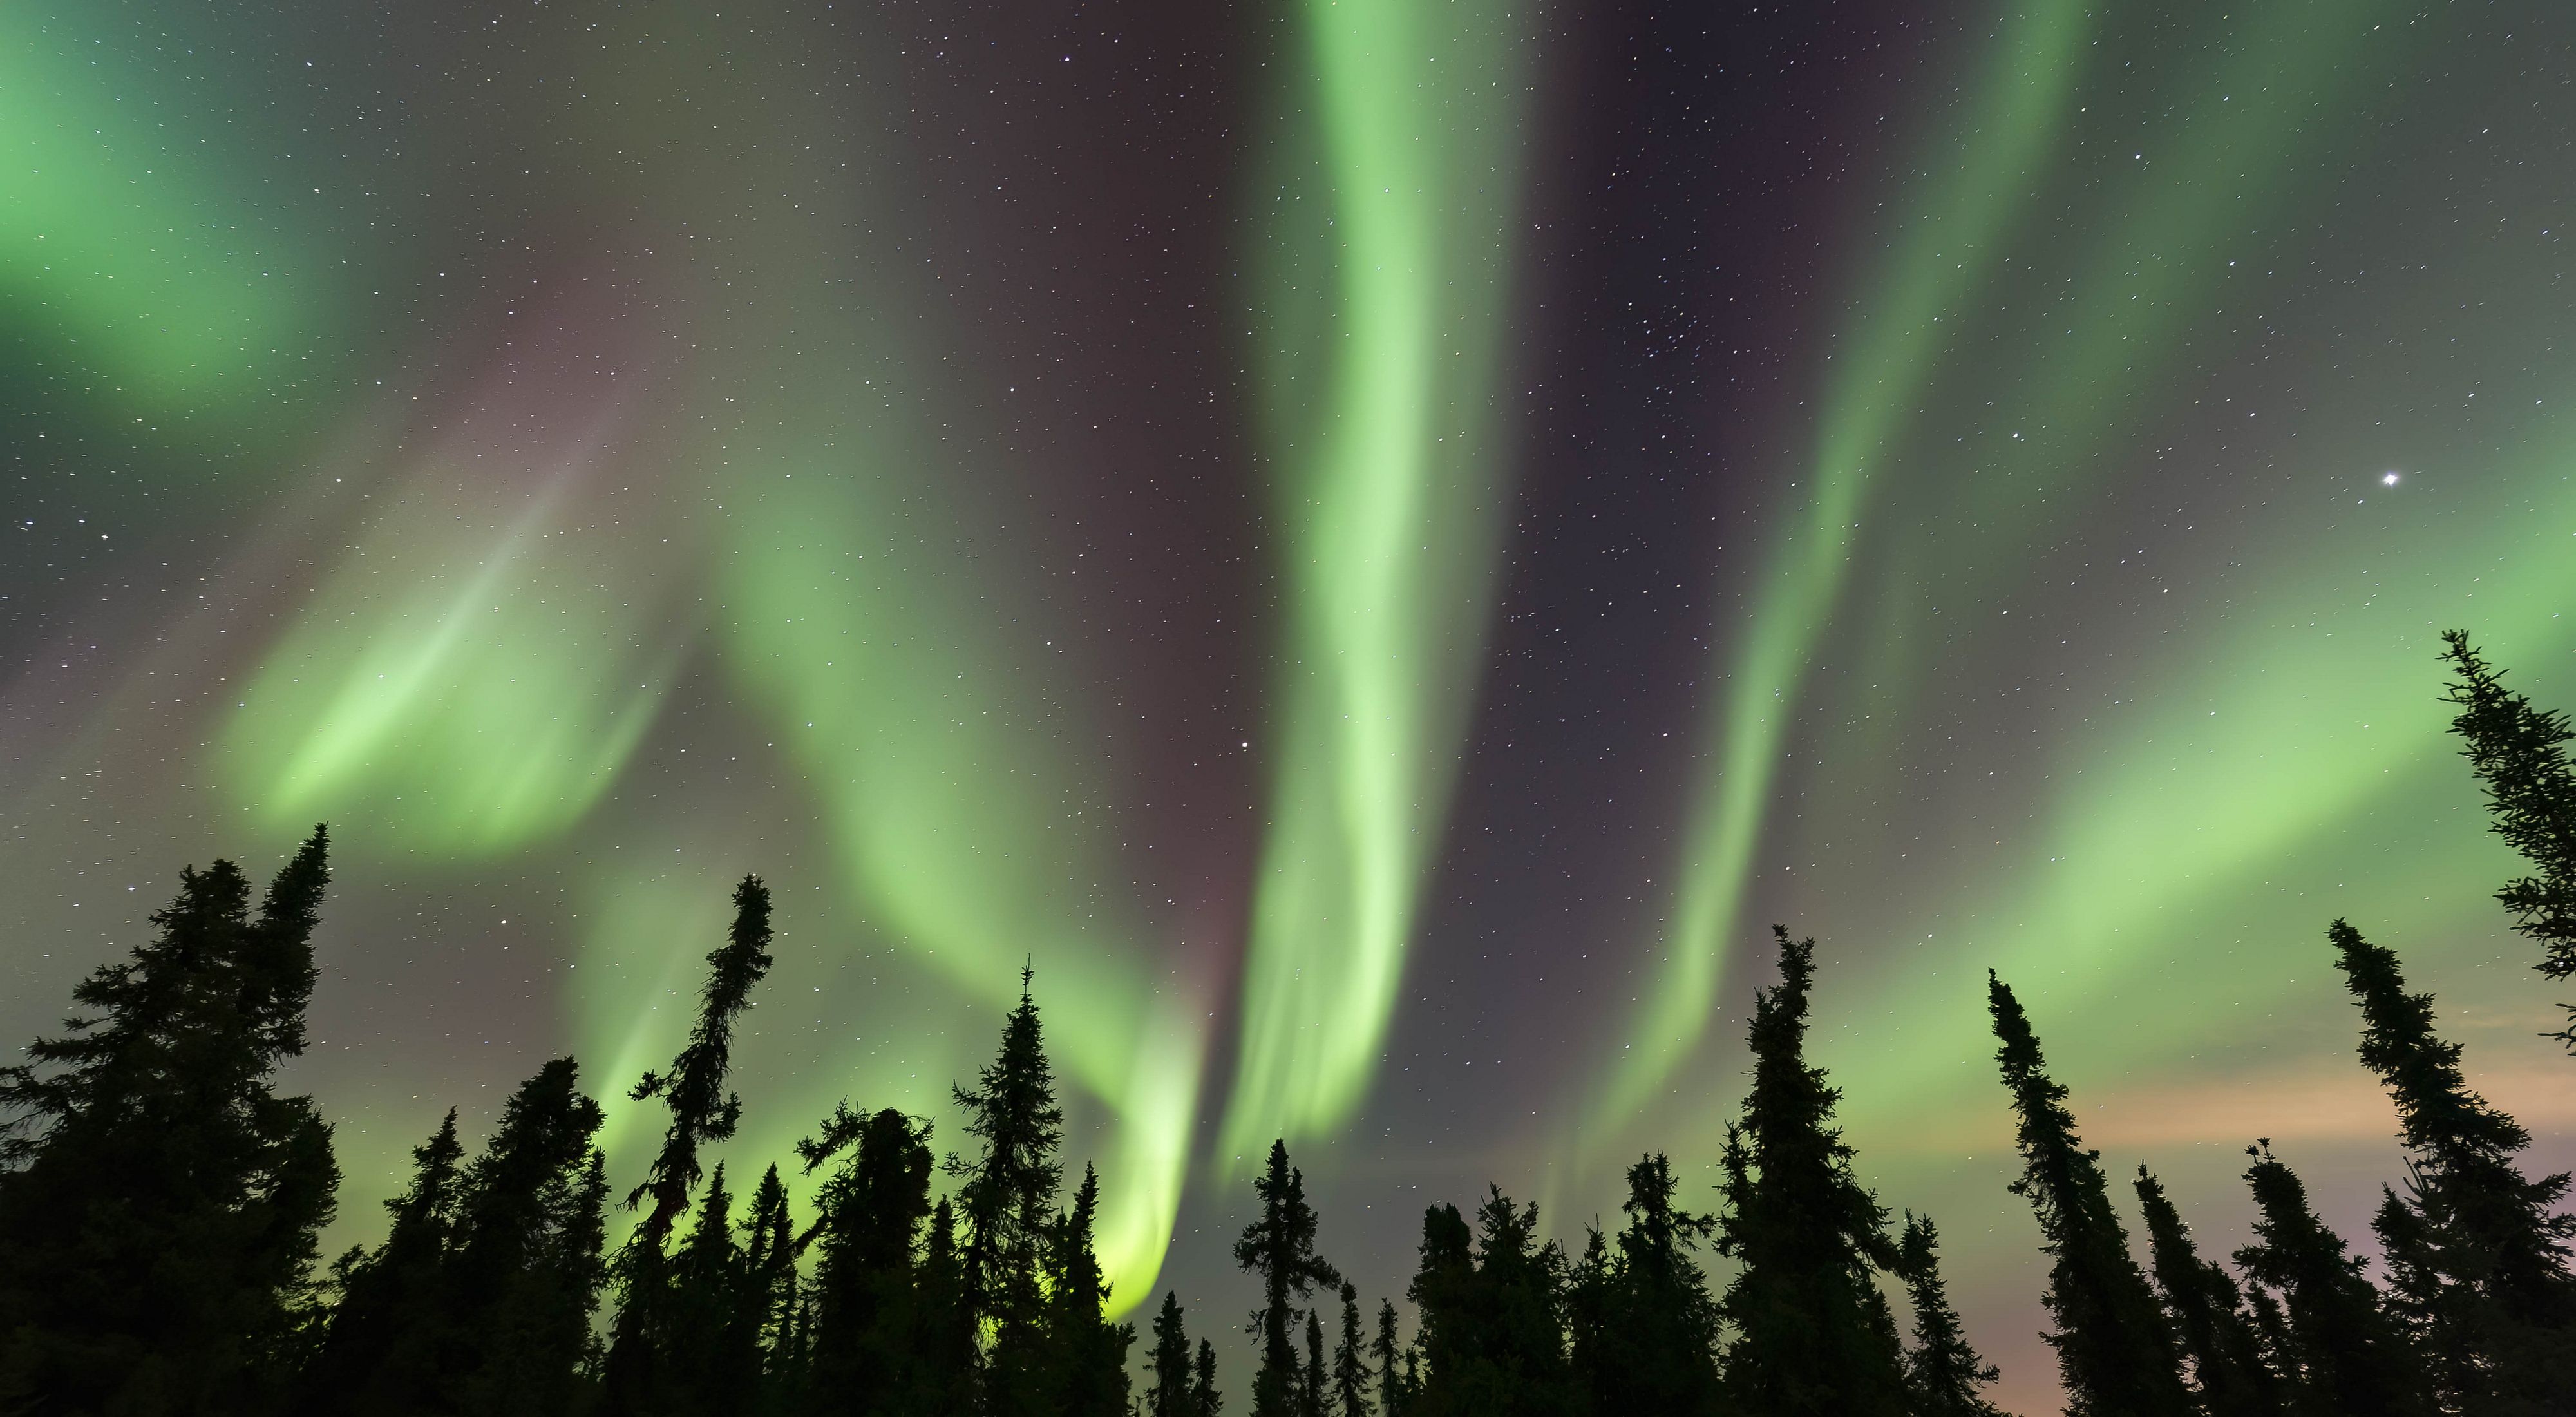 Northern lights of green and purple shine over trees at night.